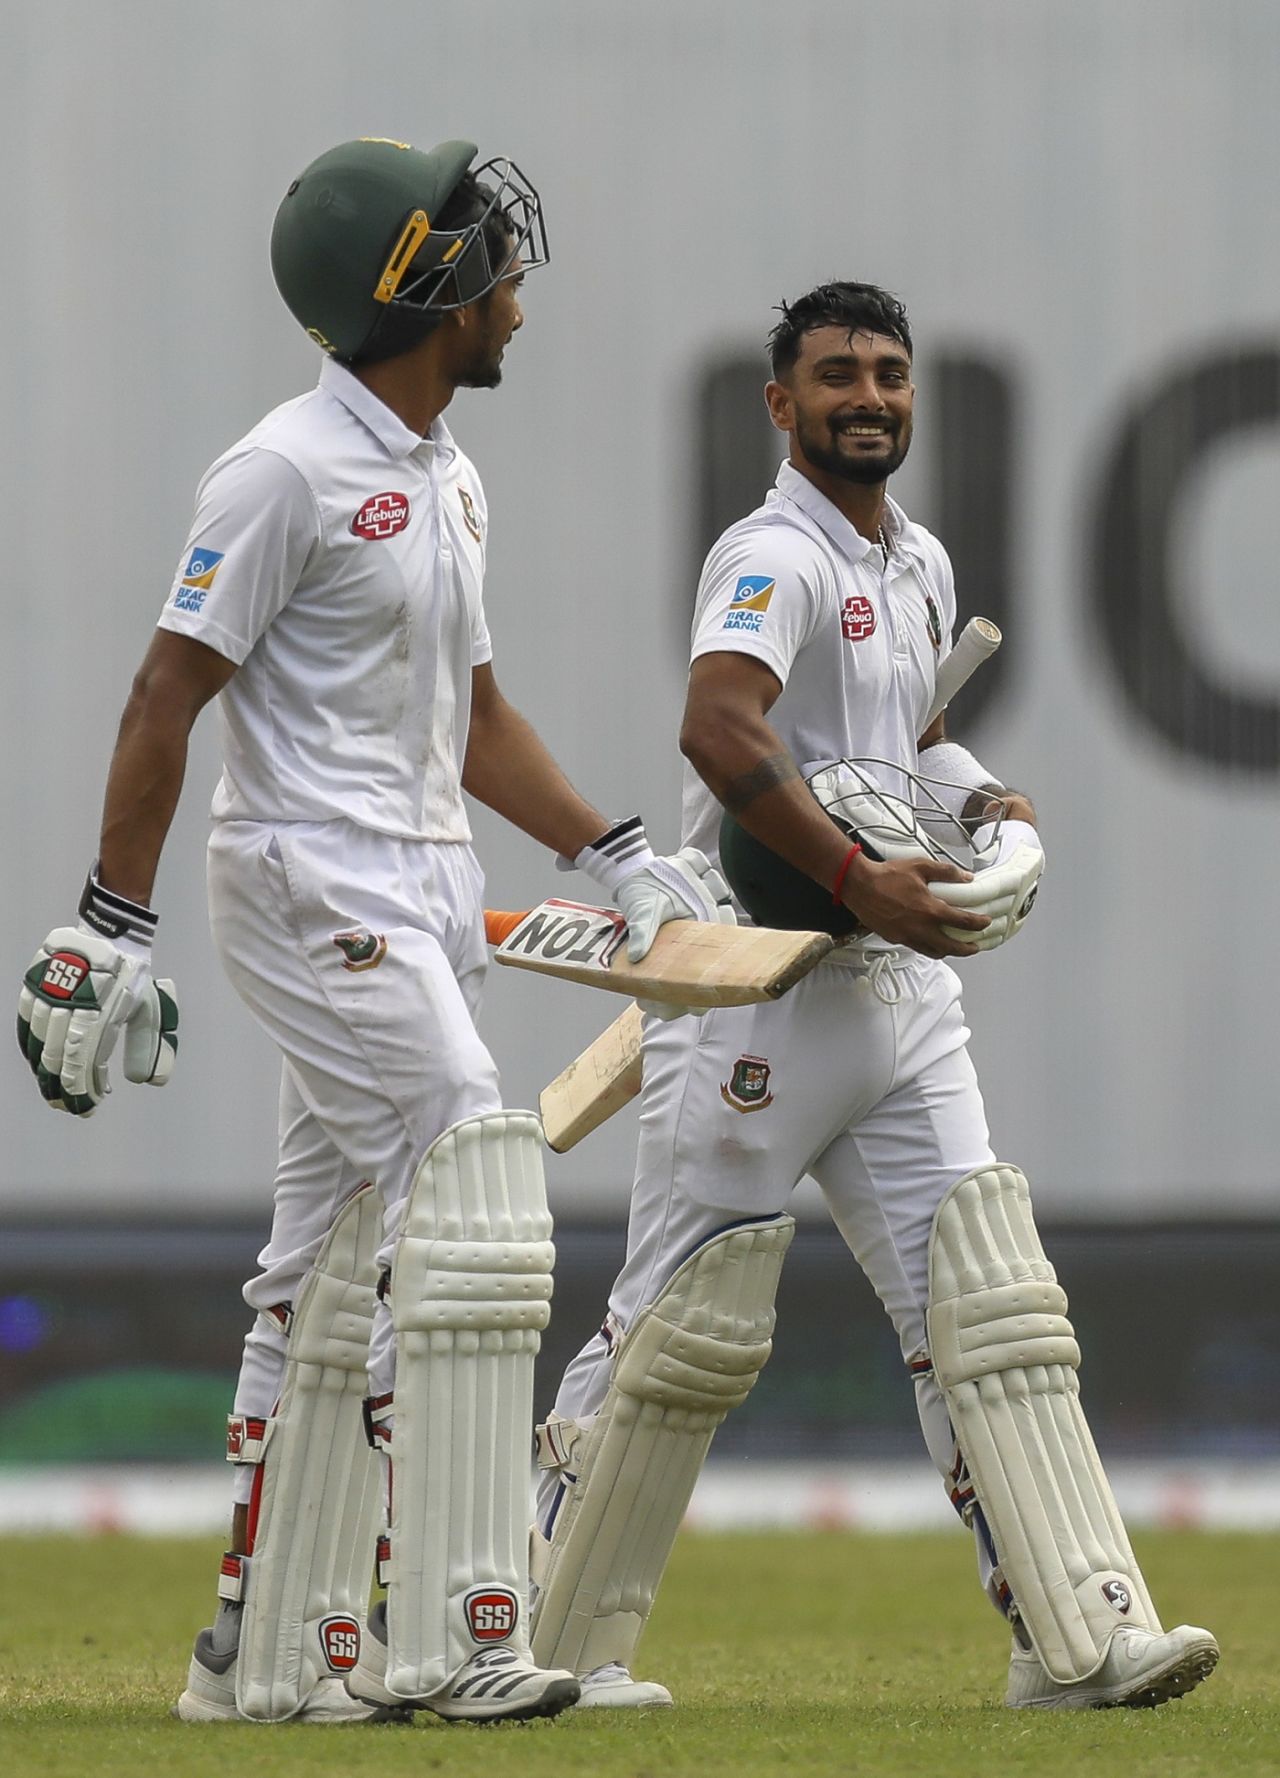 Mahmudullah and Liton Das walk back after a promising first session, Bangladesh v West Indies, 2nd Test, Mirpur, 2nd day, December 1, 2018